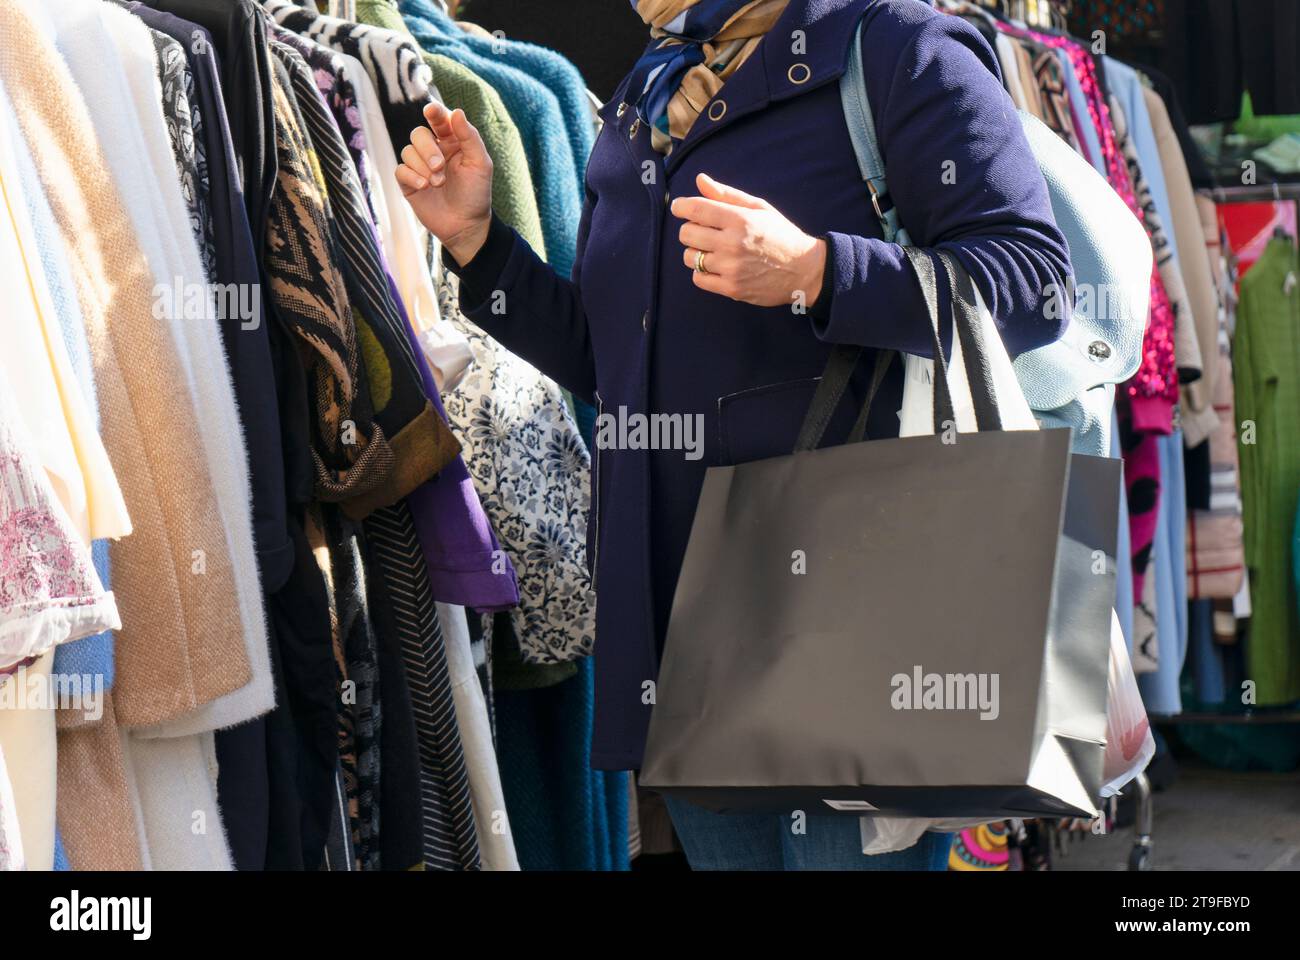 A woman shopping at an outdoor market, observes clothes hanging on racks and hangers in a city square Stock Photo